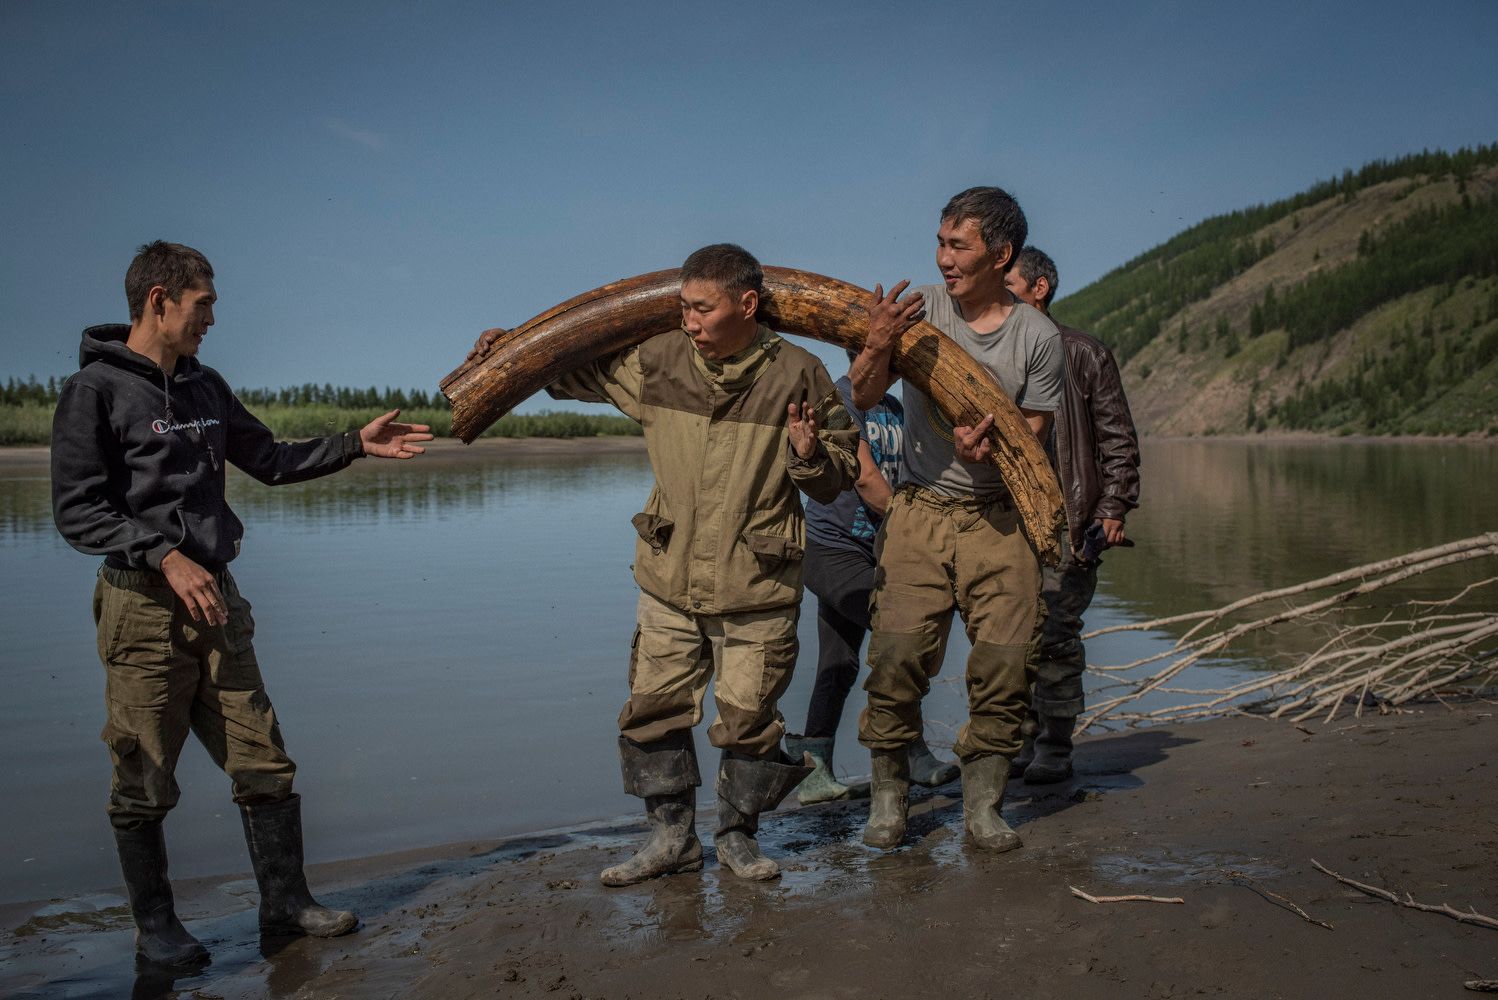 Verkhoyansky District, Sakha Republic (Yakutia), Russia, July 2017. These mammoth hunters have just uncovered one tusk by tunneling underground with water pumps adapted from firefighting gear and snowmobile engines. The price for one kilogram of the ivory being 60$, one tusk would cover their expenses. I was told that they found another one shortly afterwards.